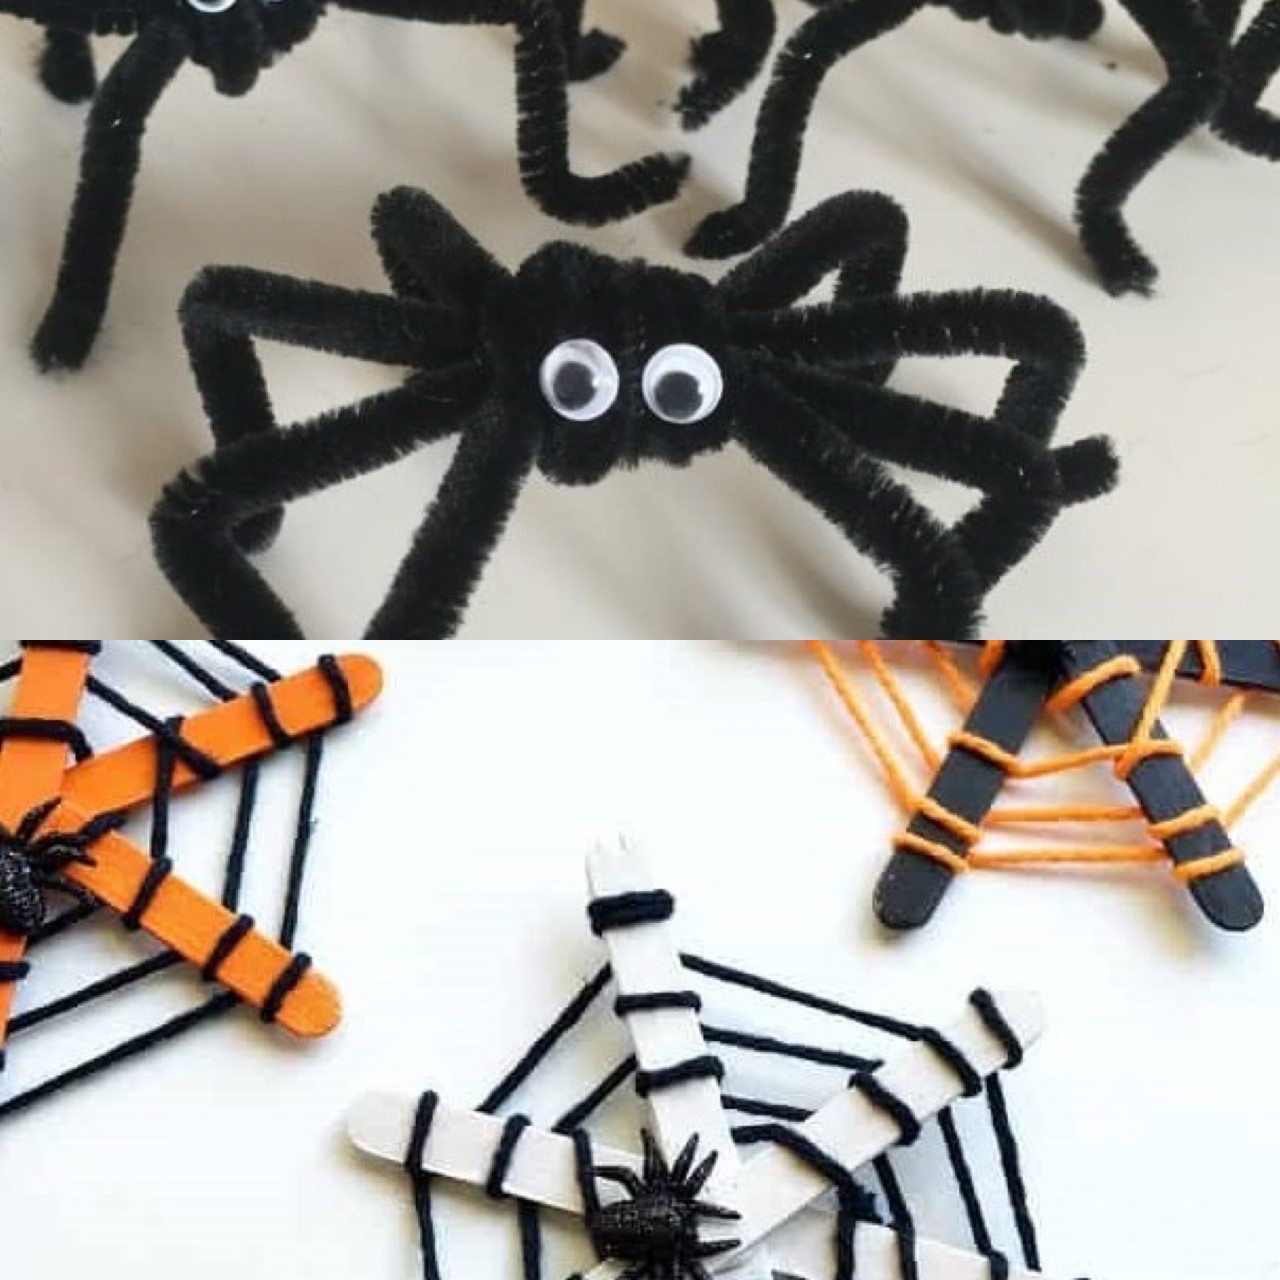 Not-So-Scary Spiders and Webs